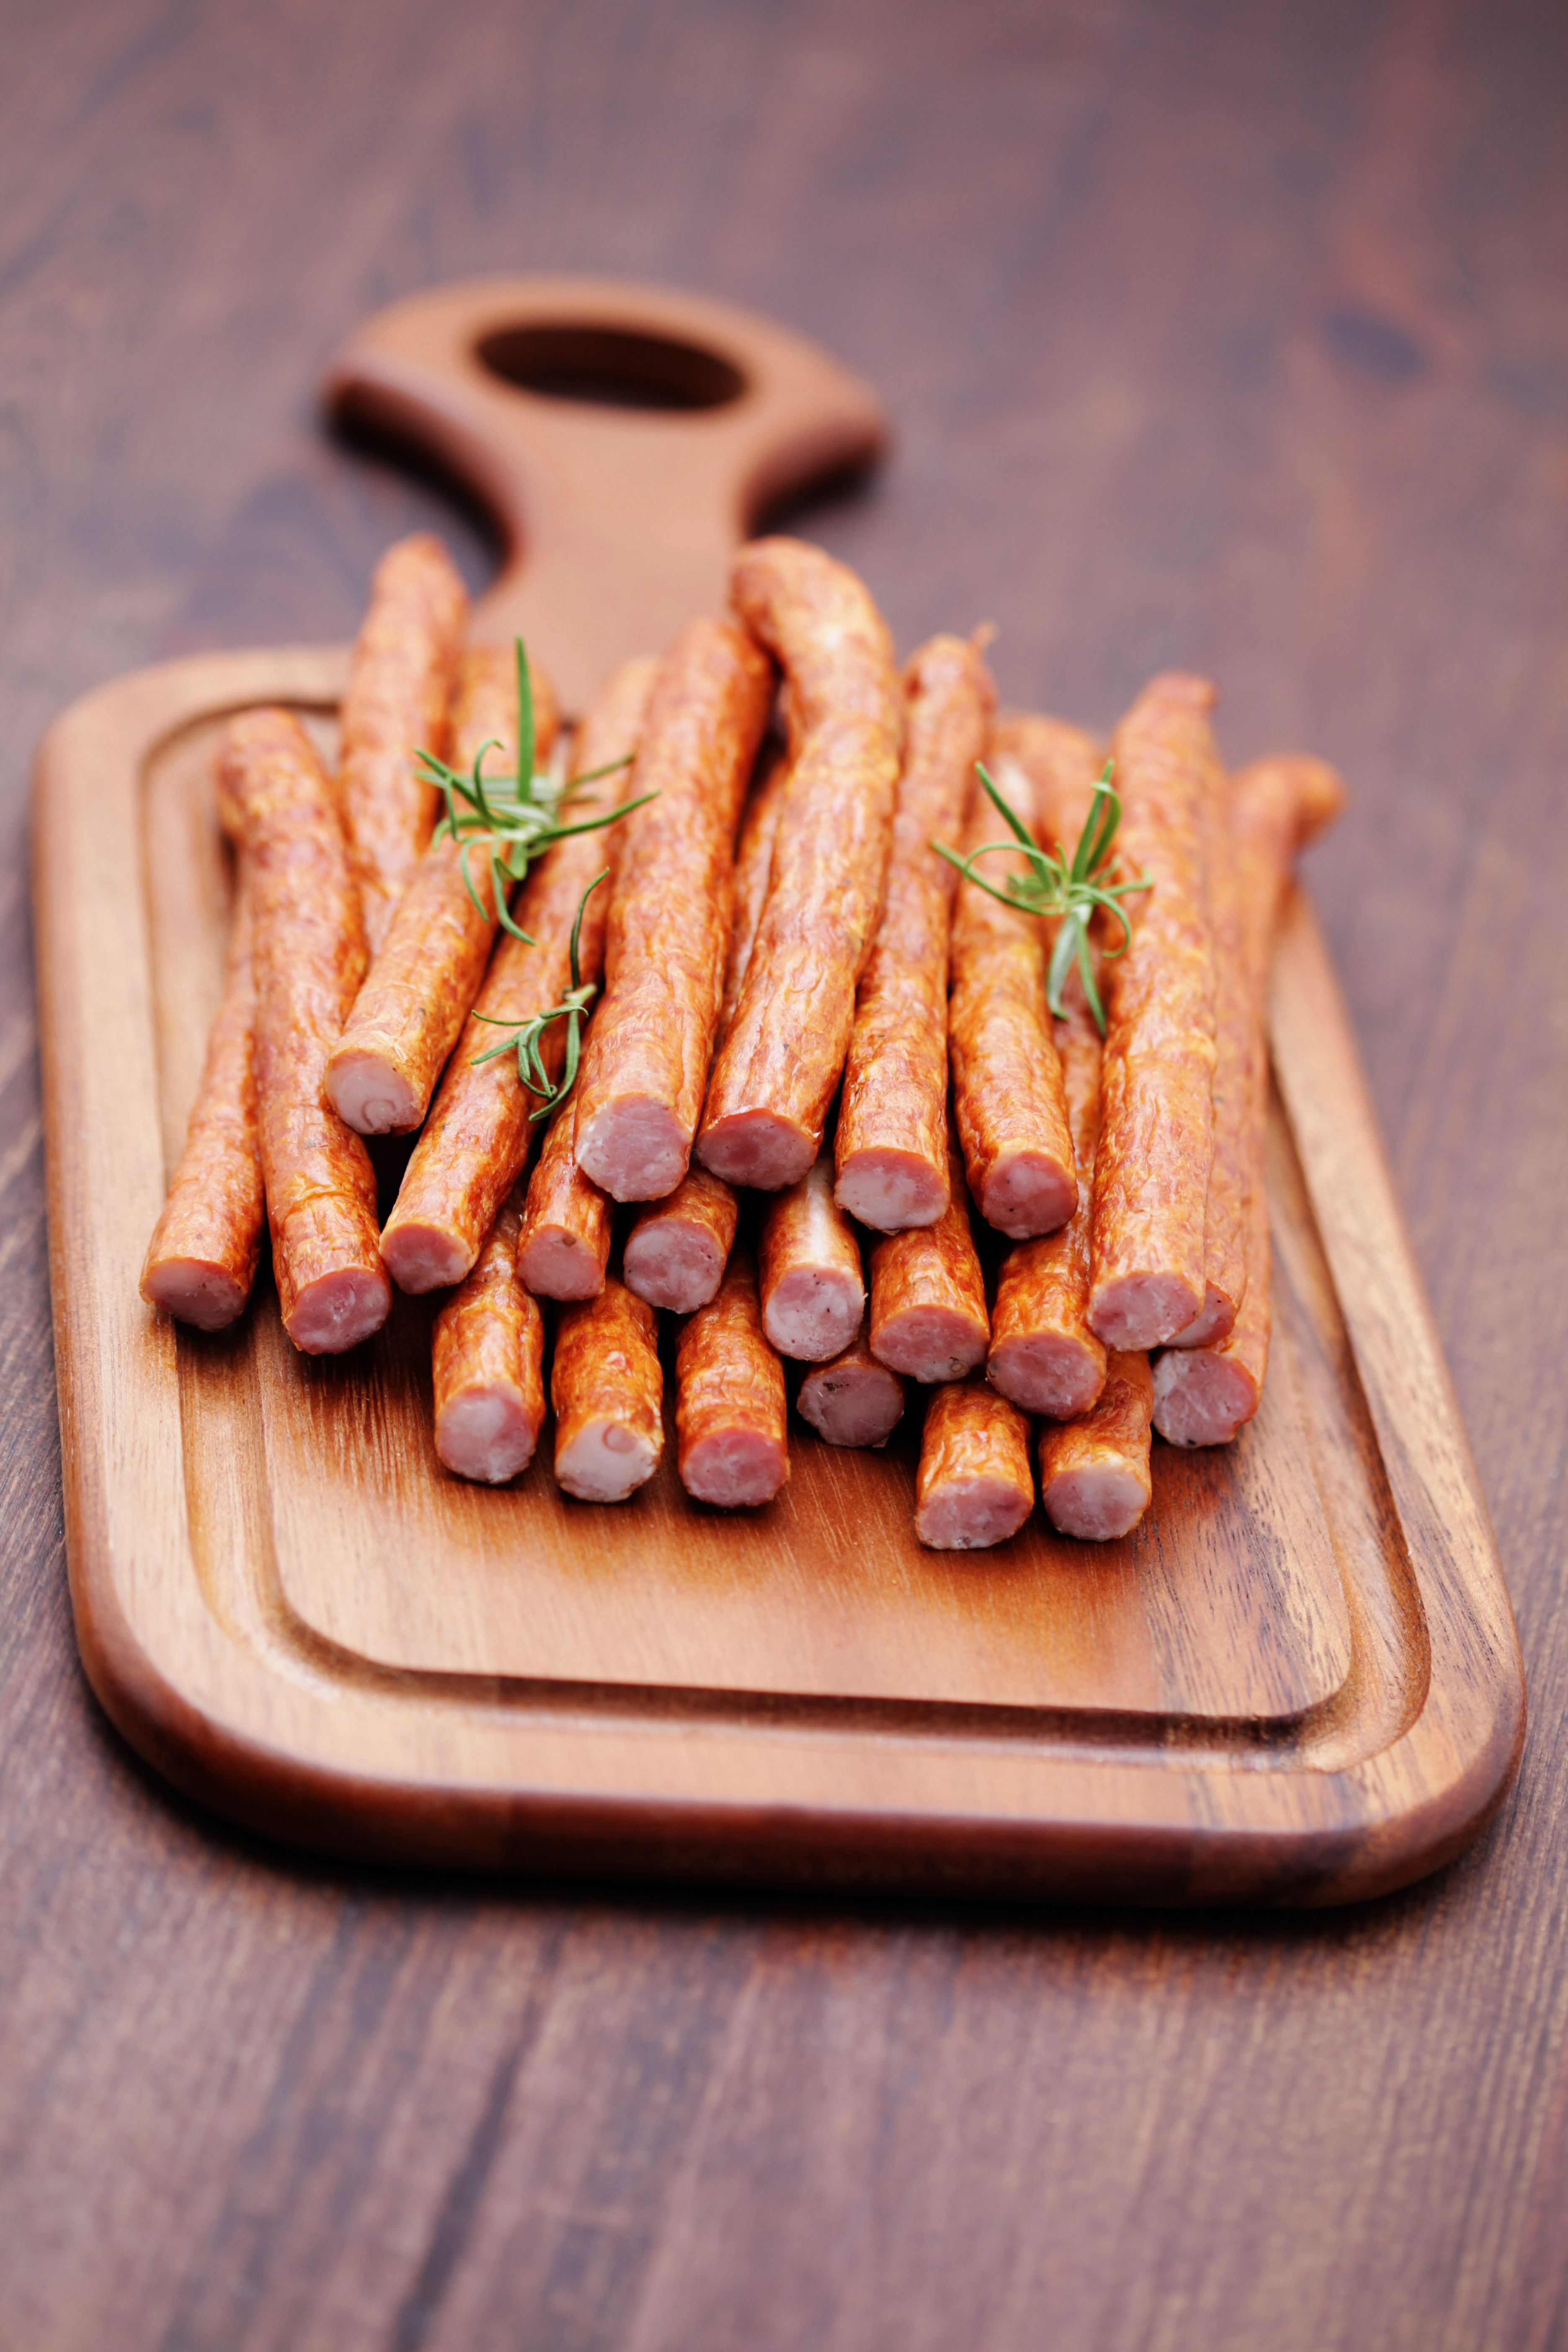 Make your own smoked beef sticks